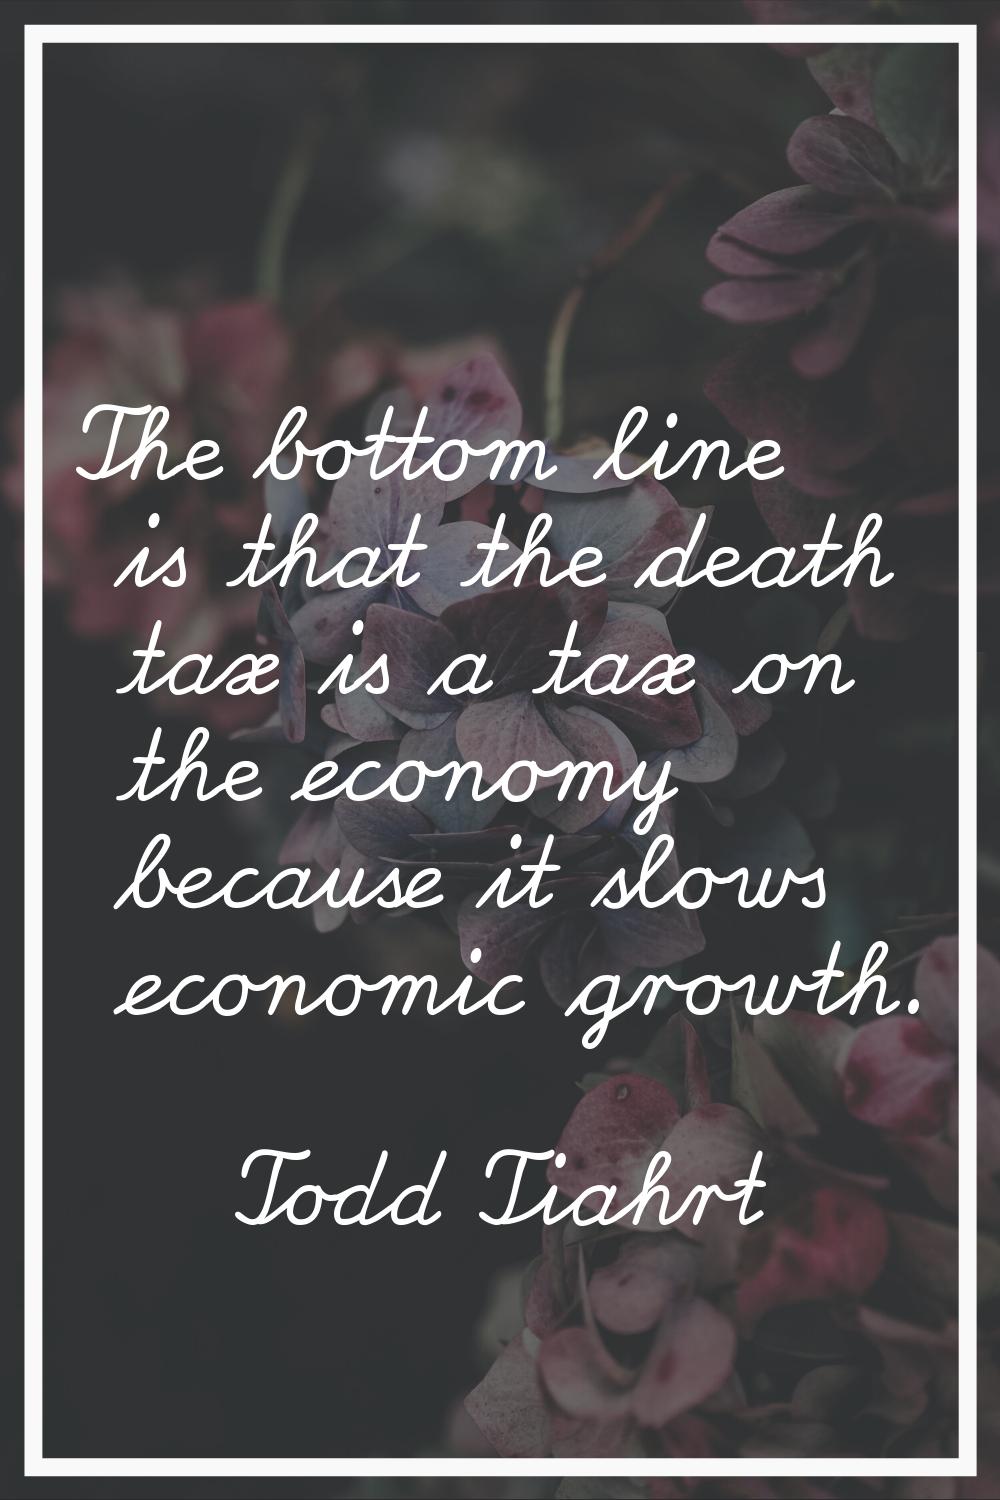 The bottom line is that the death tax is a tax on the economy because it slows economic growth.